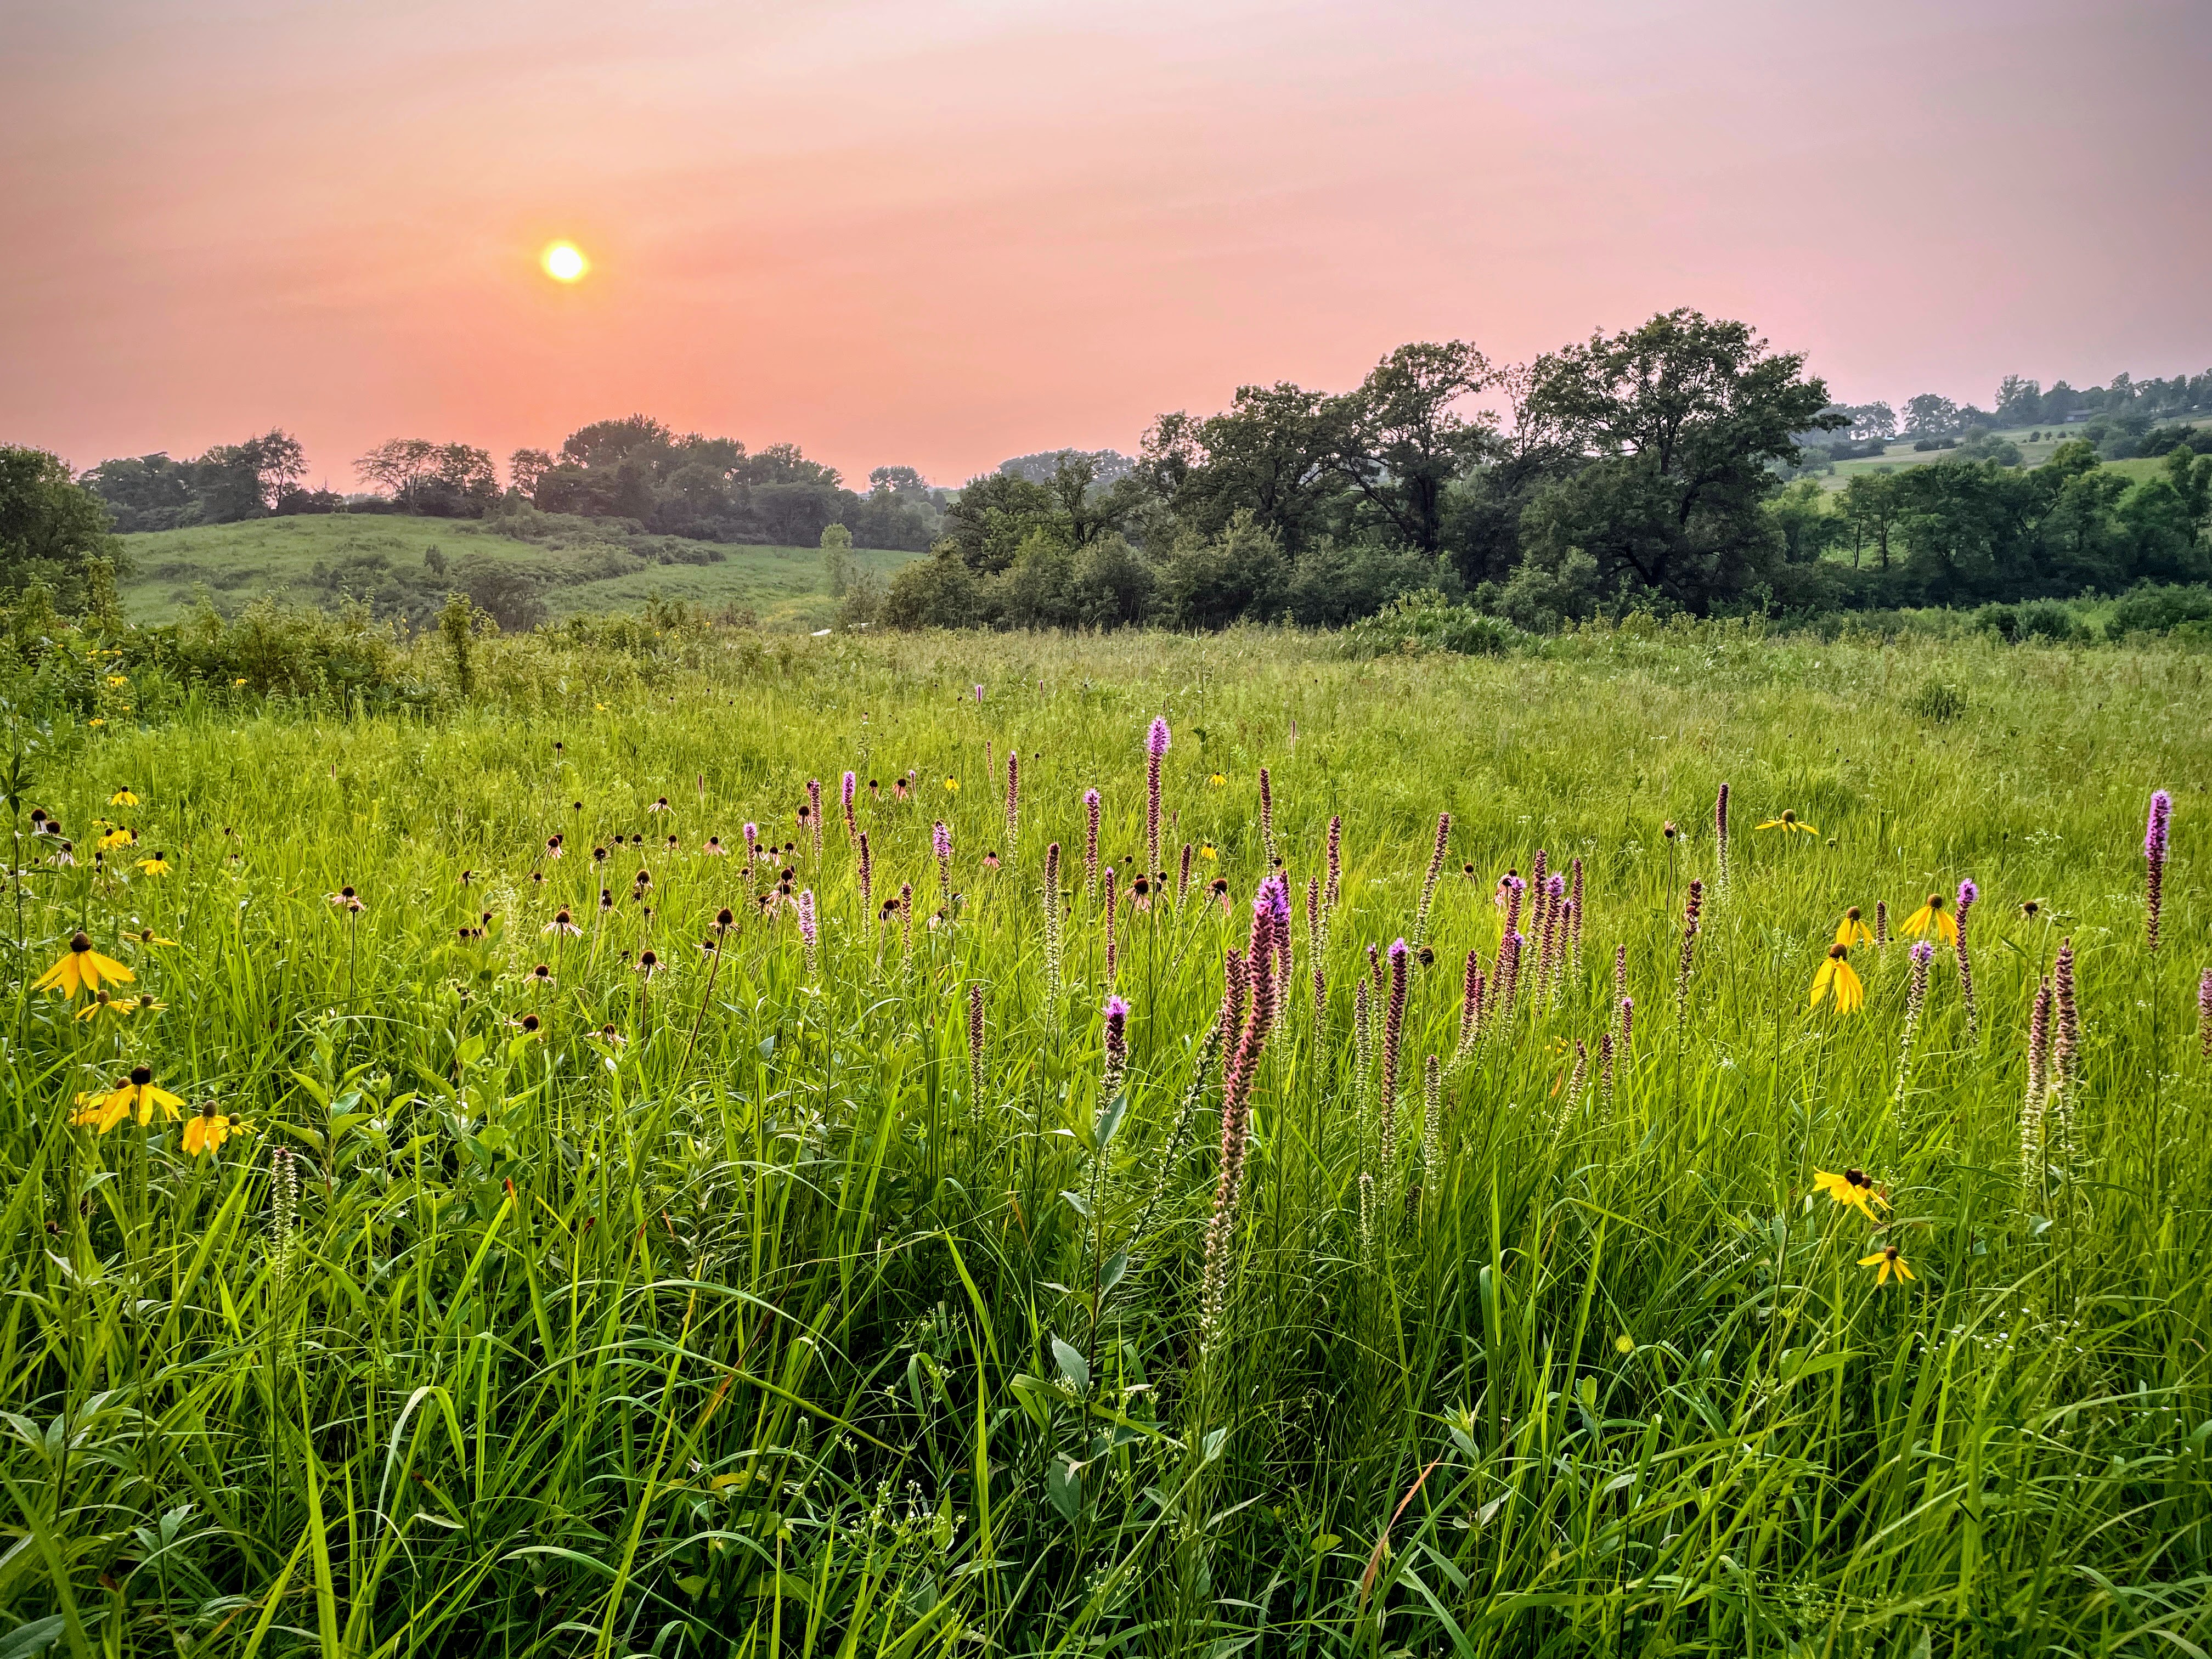 A sun sets in a red-tinted sky over rolling prairie. In the foreground, prairie blazing star, a wildflower with fuzzy pink spikes, stands in full bloom.